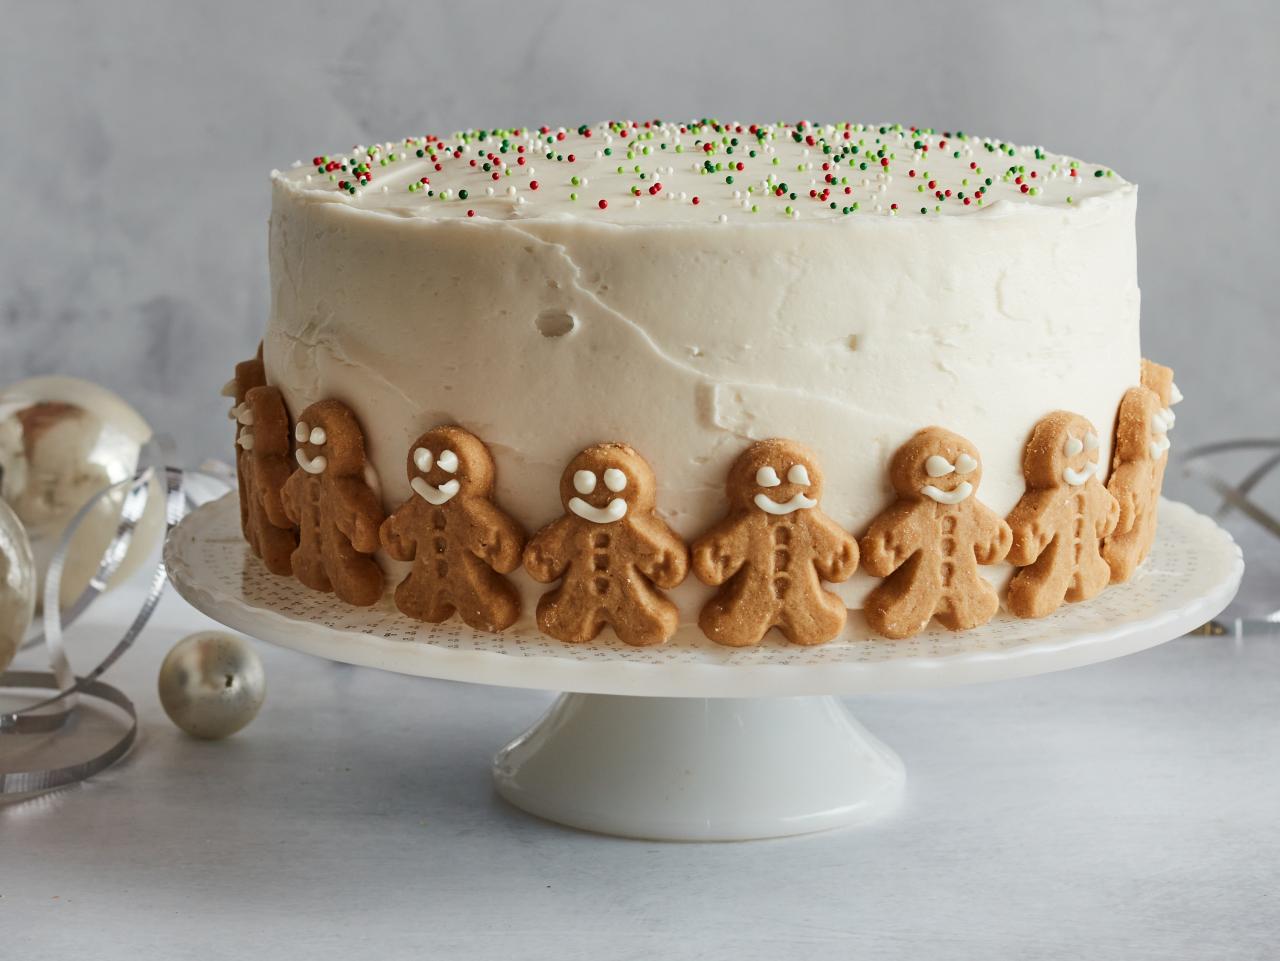 Spiced Gingerbread Cake (Many Sizes)